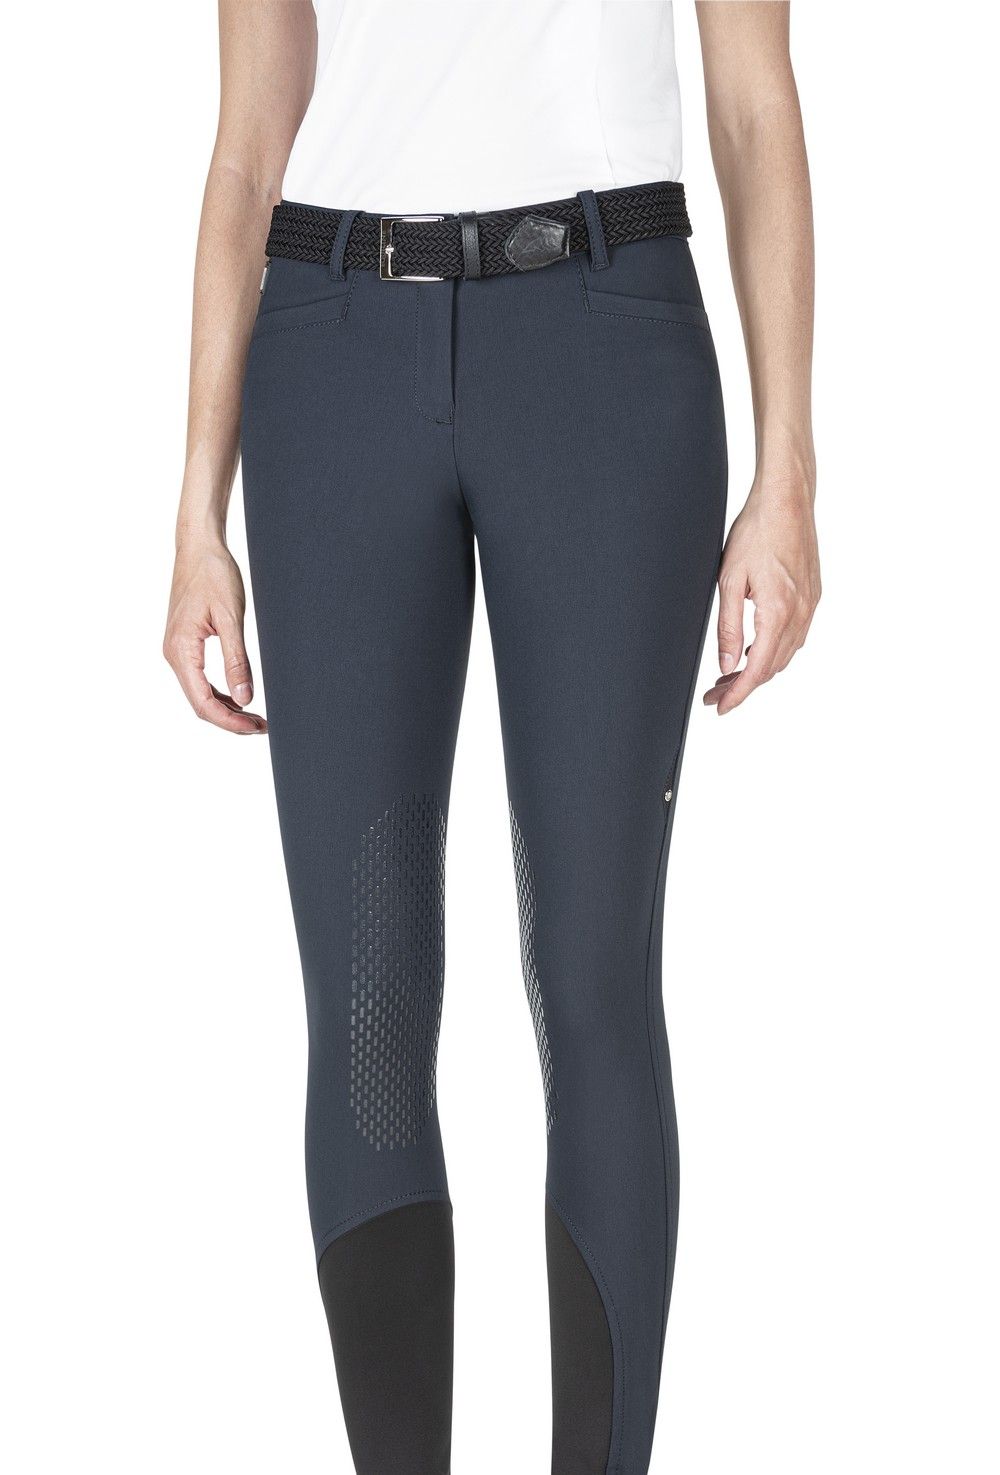 Equiline riding breeches knee grip Ash Navy